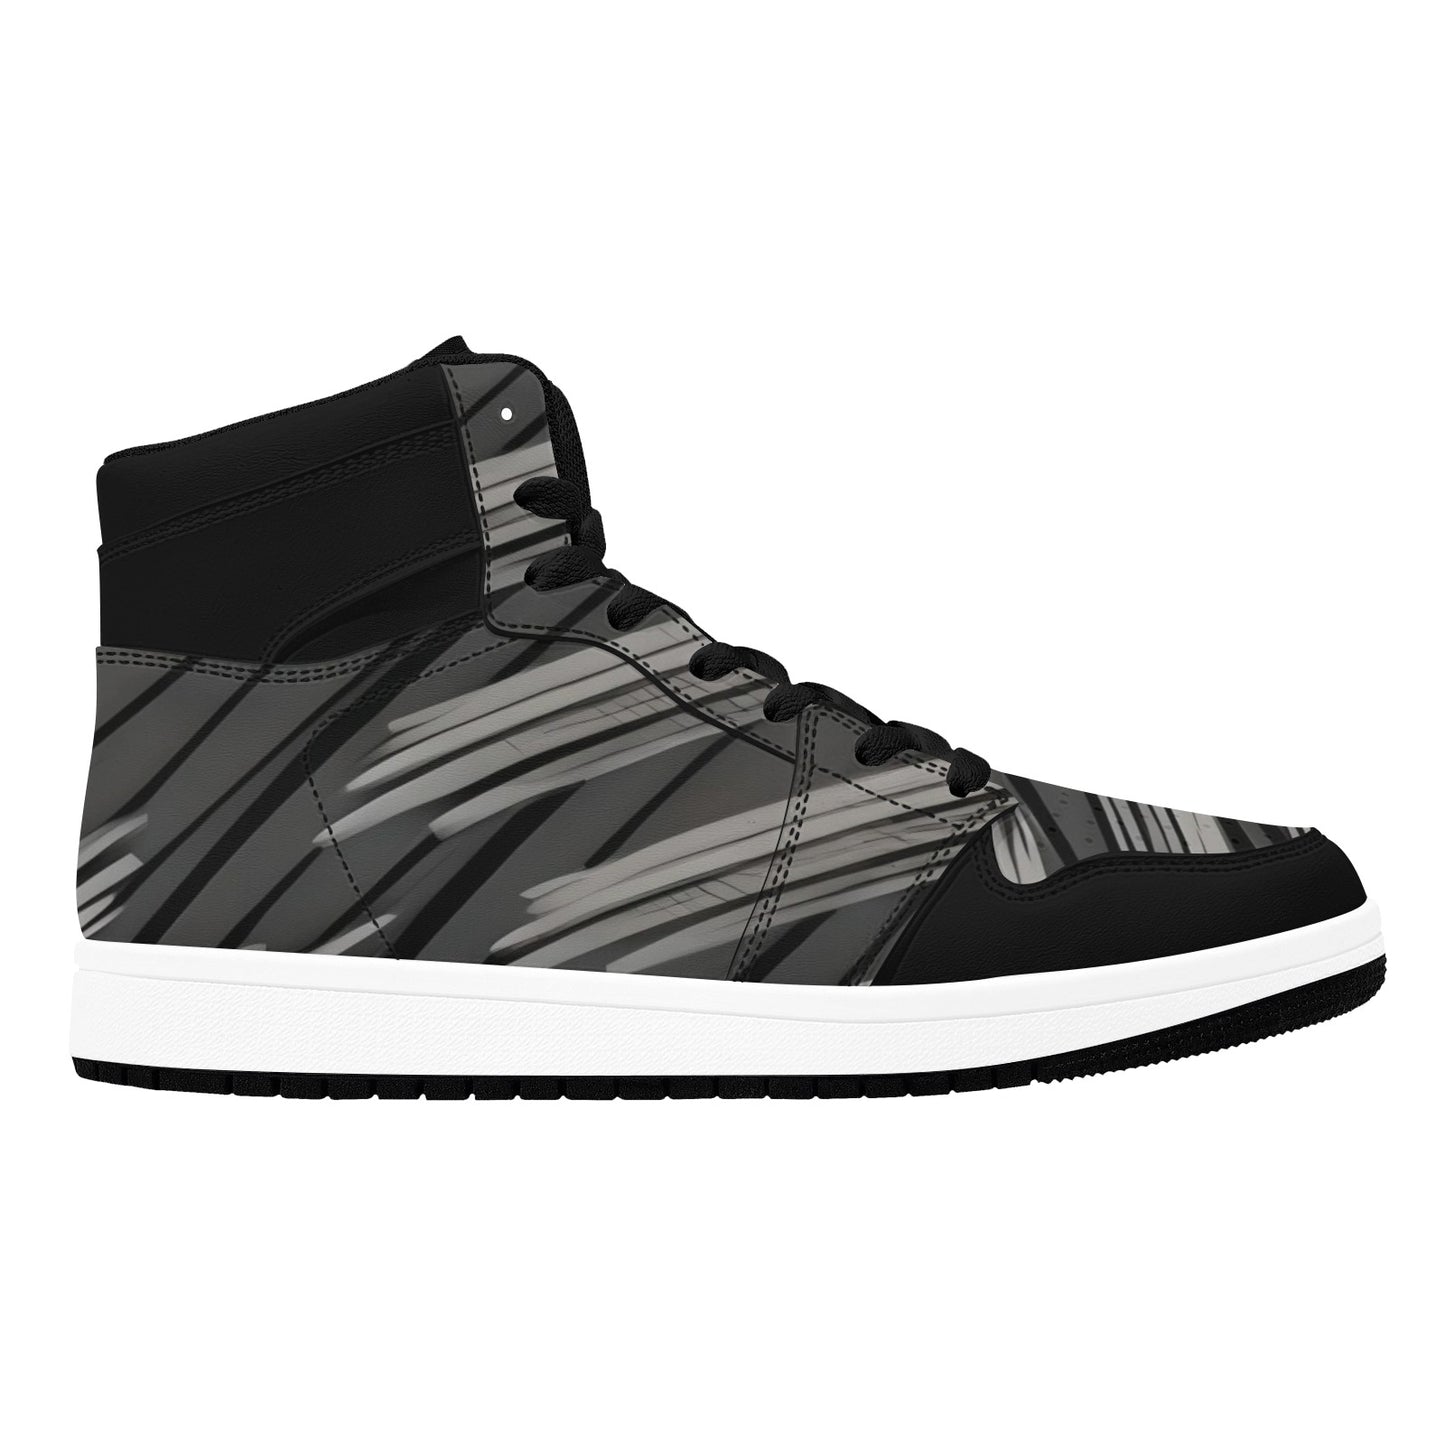 Black High Top Sneakers White Stripes High Top Sneakers Men's High Top Sneakers